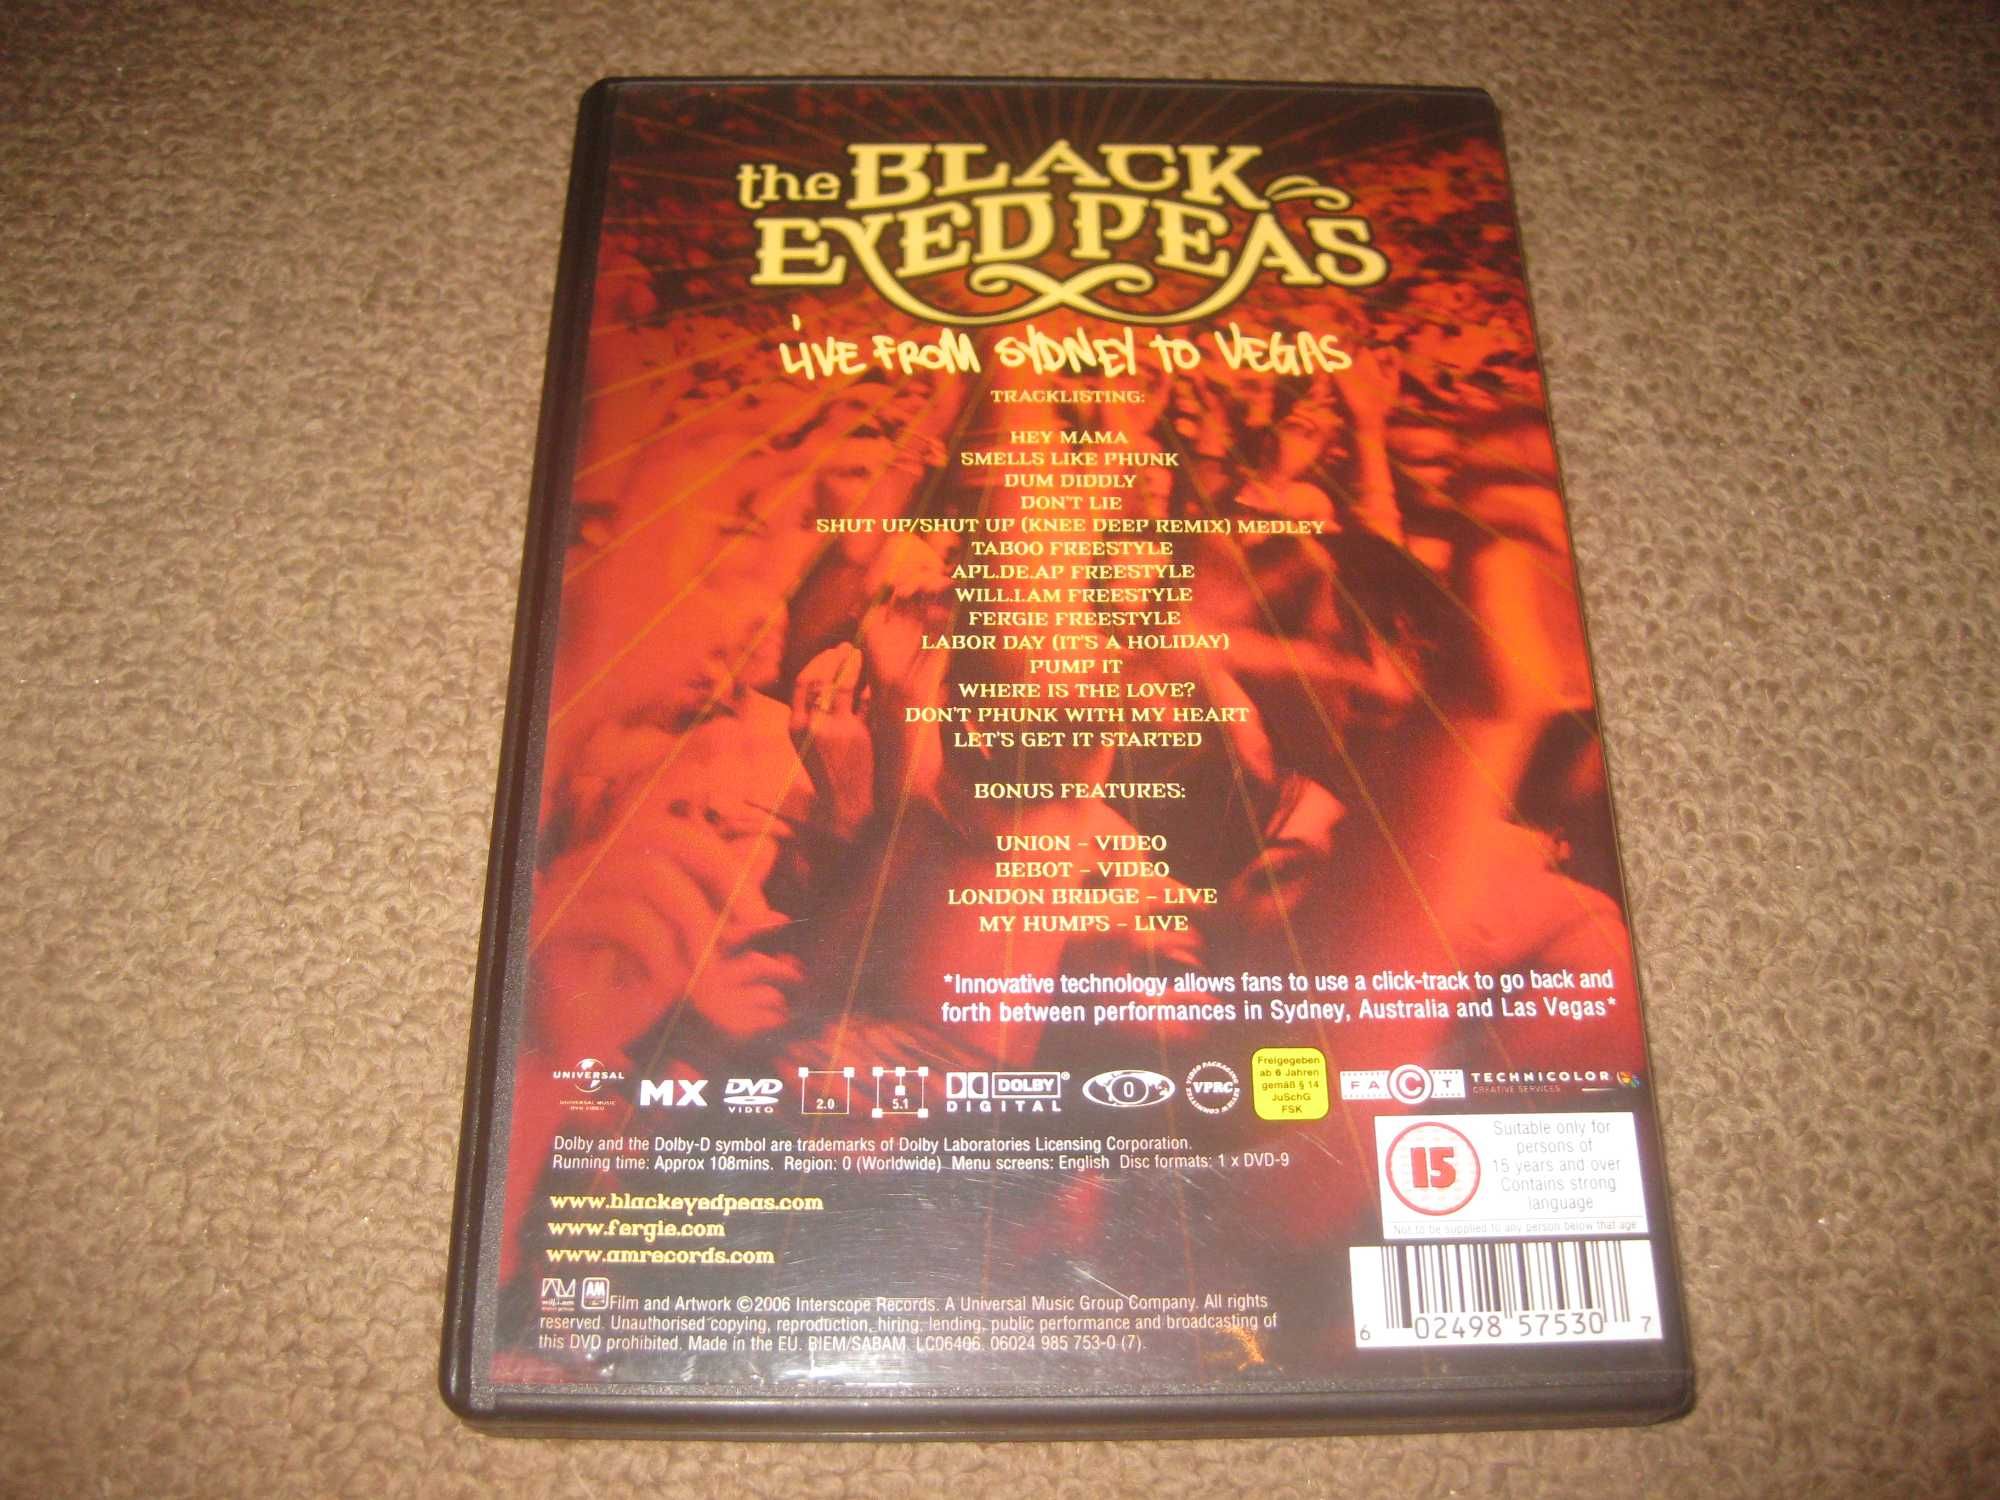 DVD dos The Black Eyed Peas "Live From Sydney to Vegas"